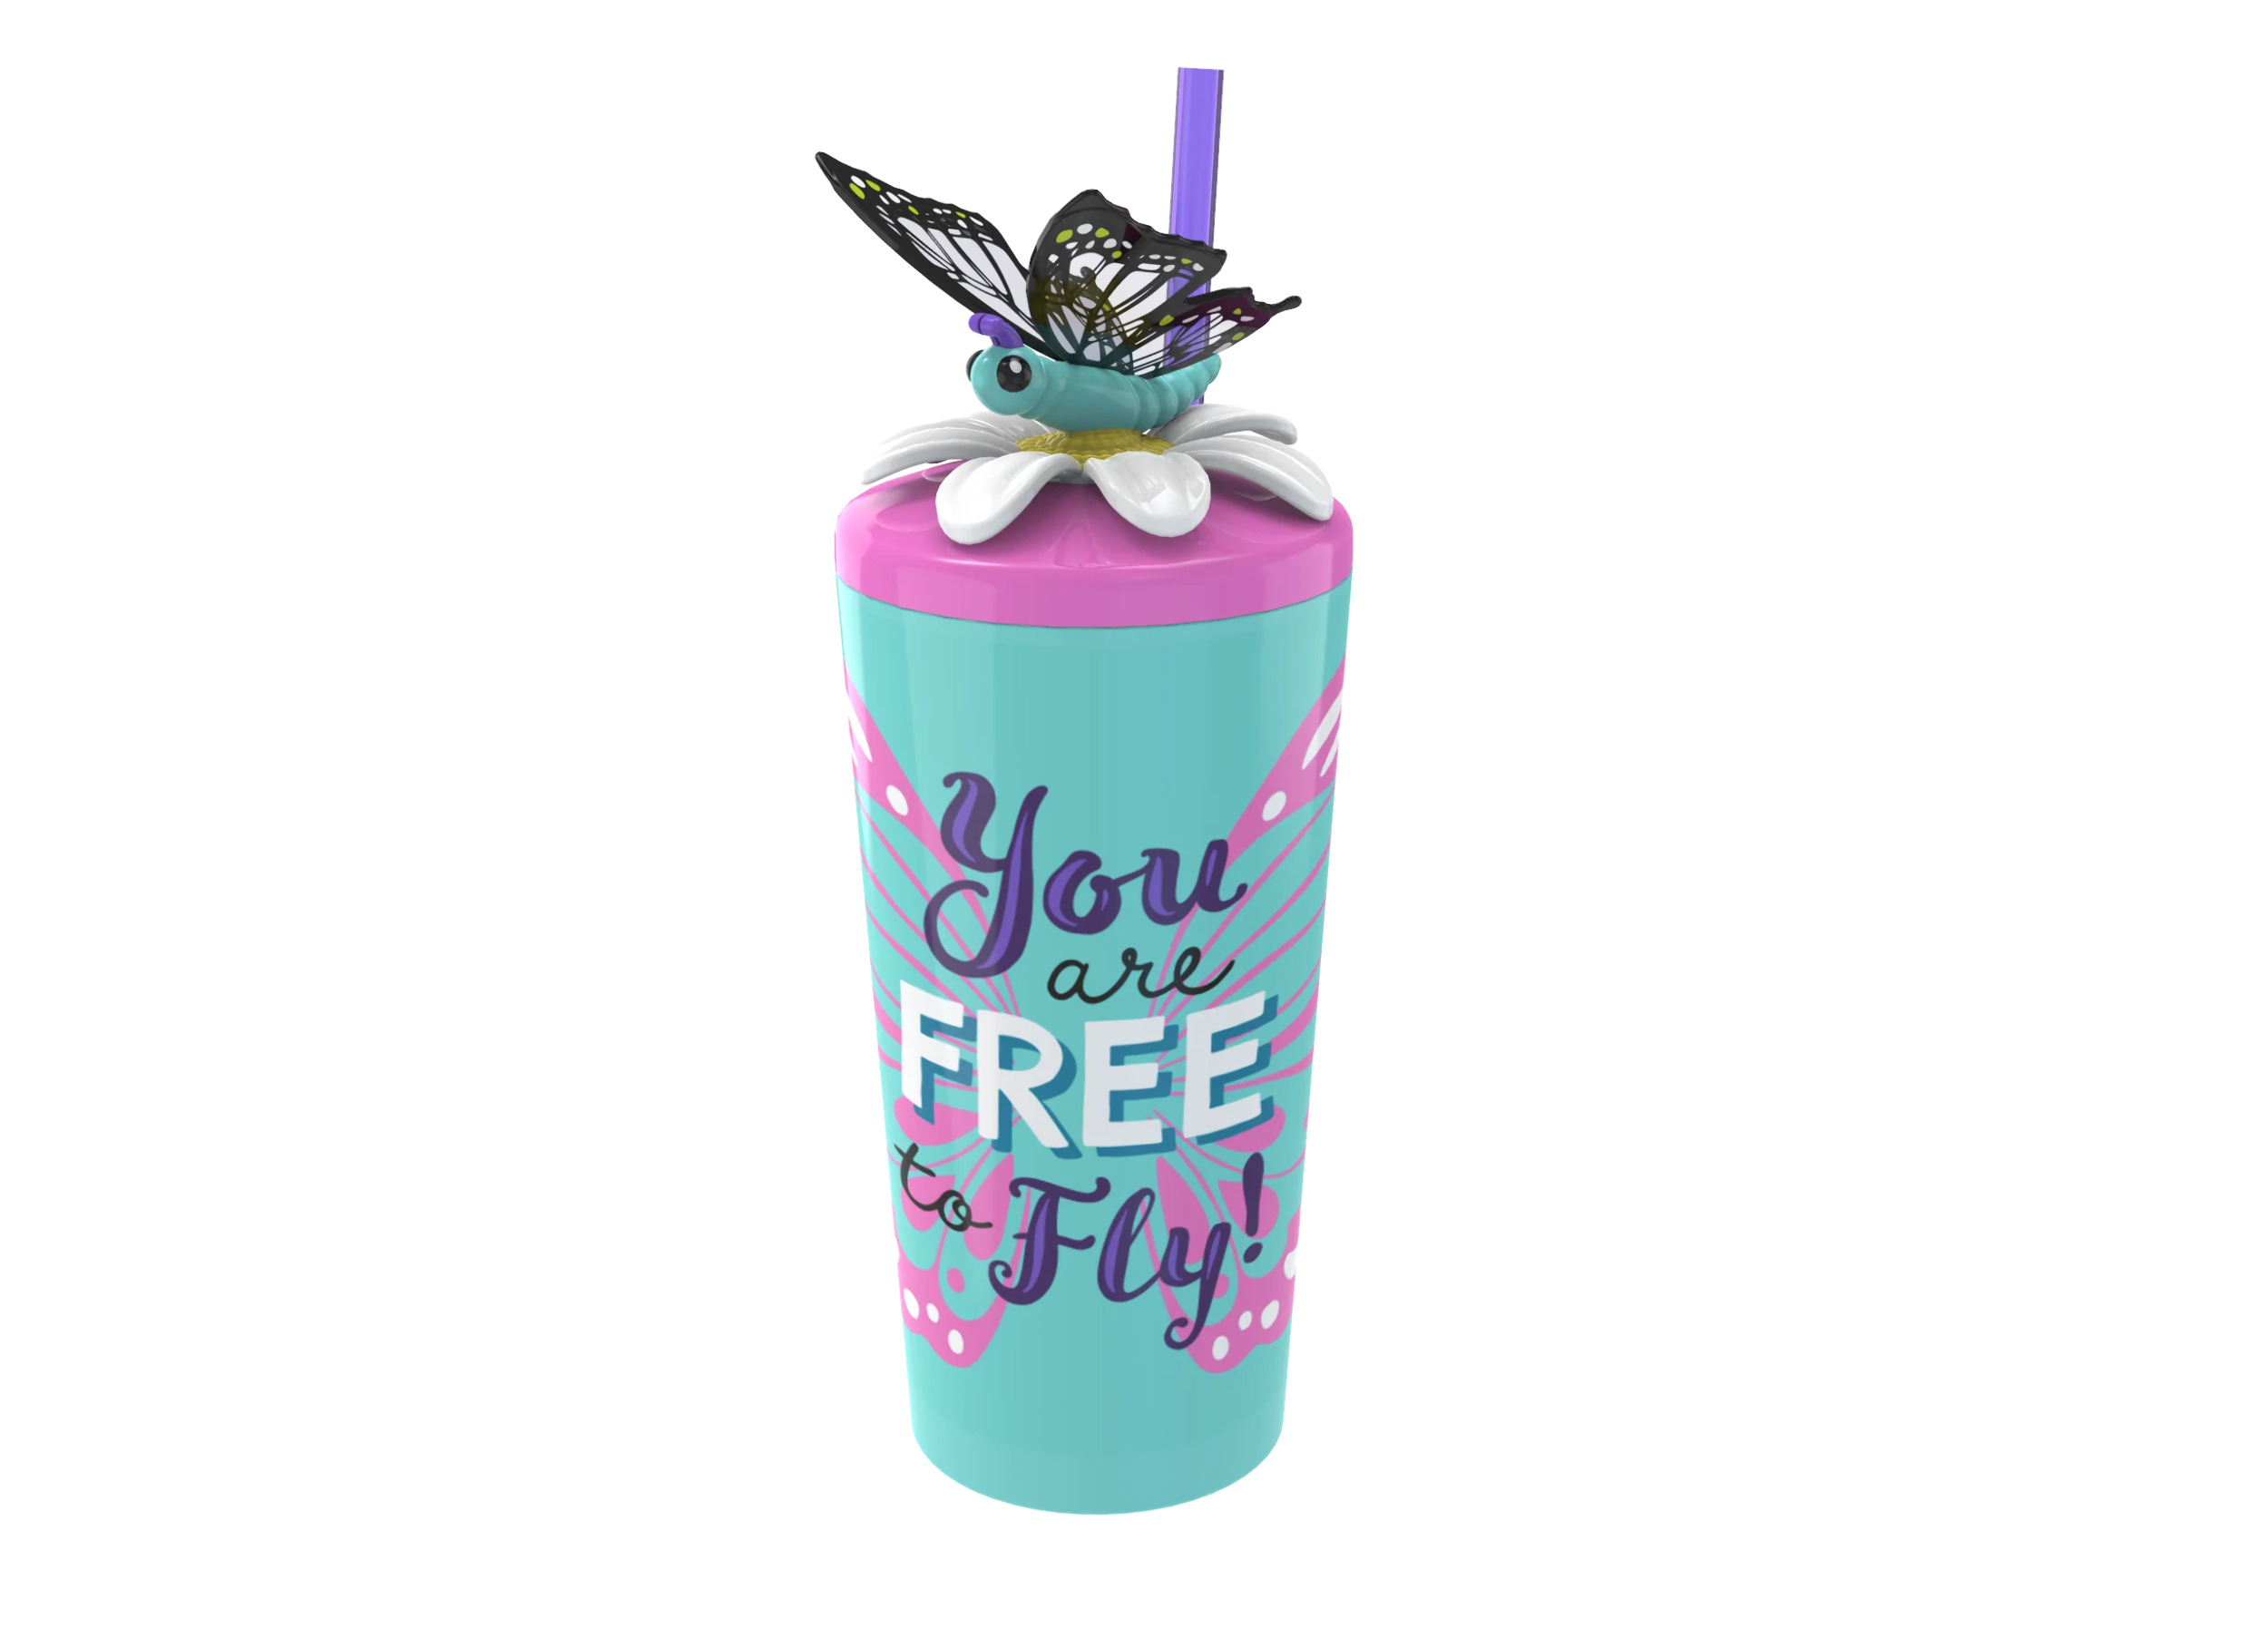 Cool Gear 4-Pack 18 oz Fun Toppers Butterfly Character Lid Tumblers with straw included | Durable, Reusable Water Bottle Gift for Kids, Adults - image 2 of 5